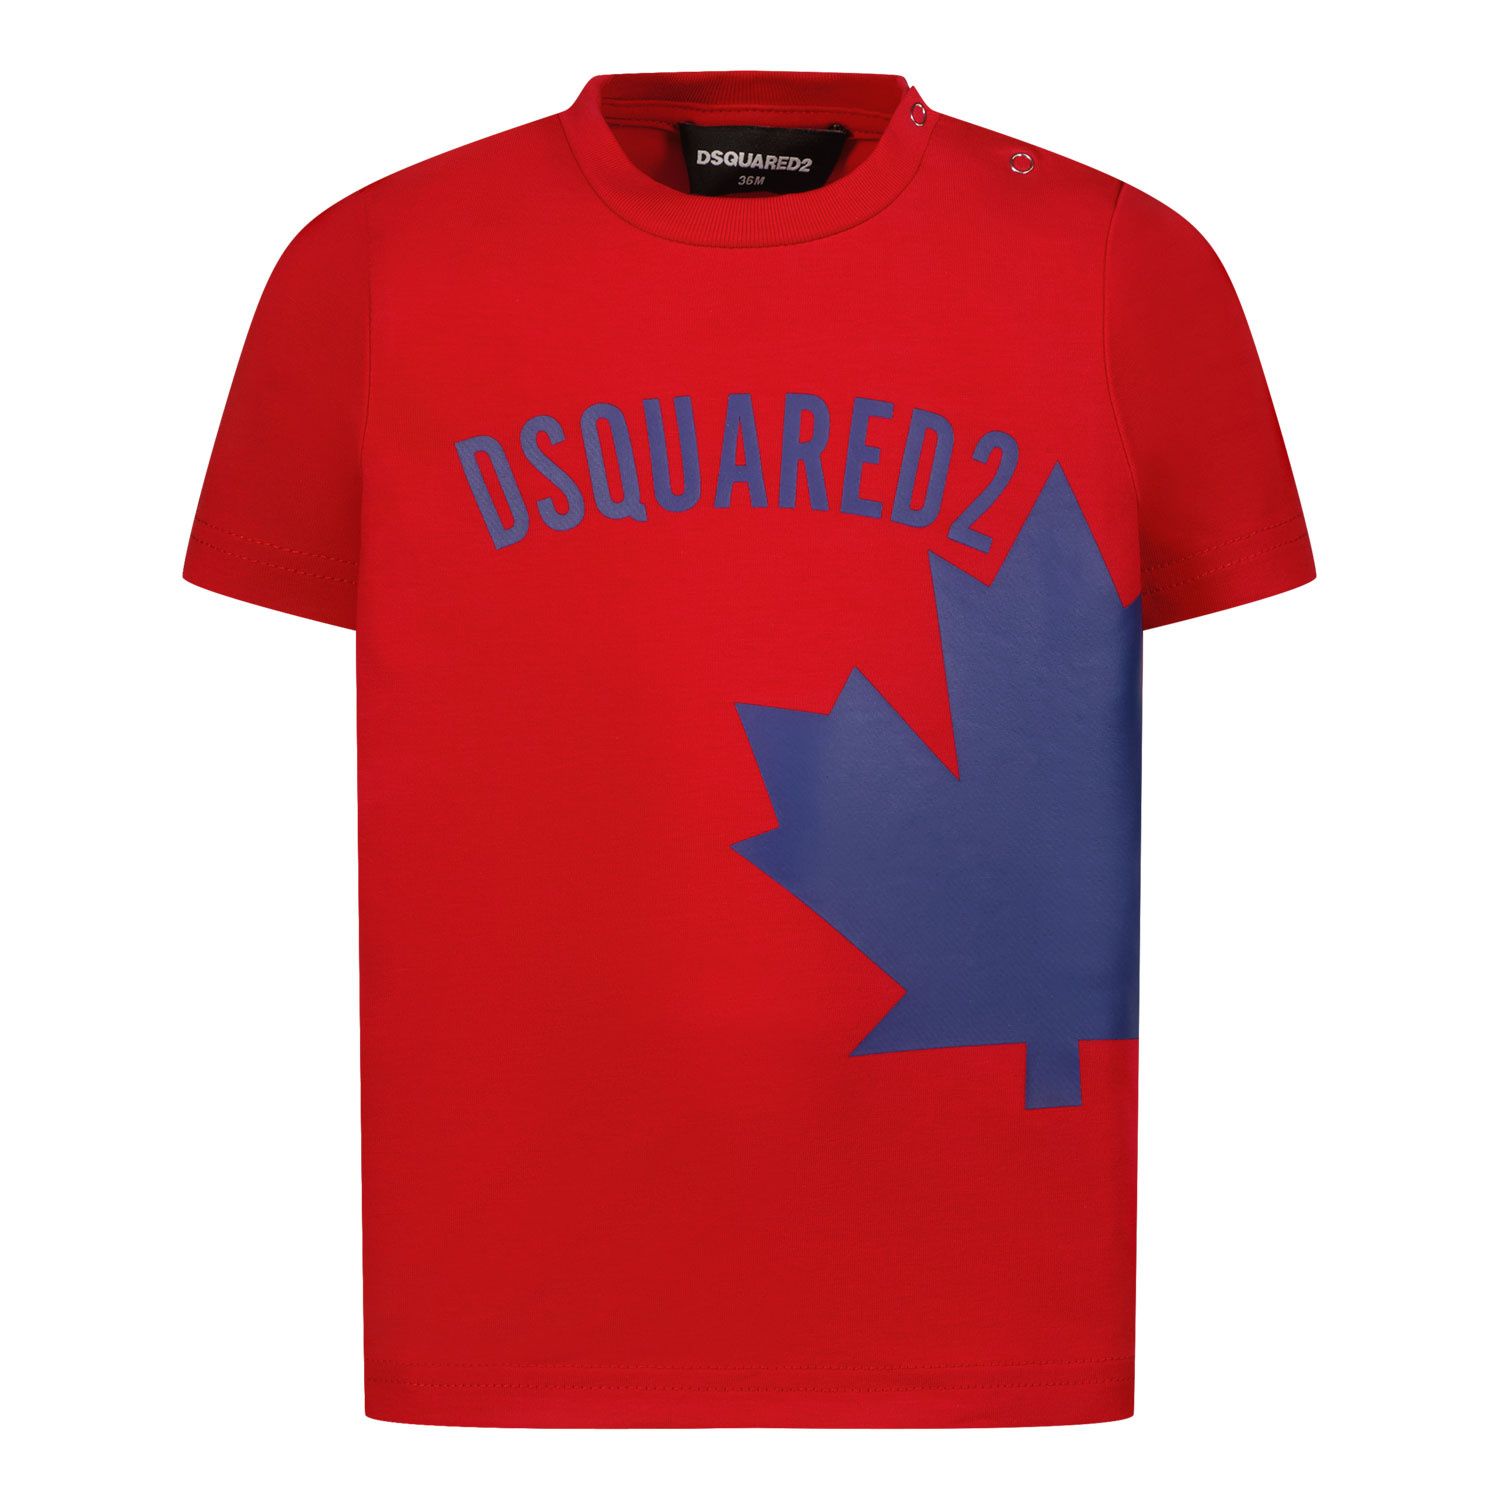 Picture of Dsquared2 DQ1025 baby shirt red